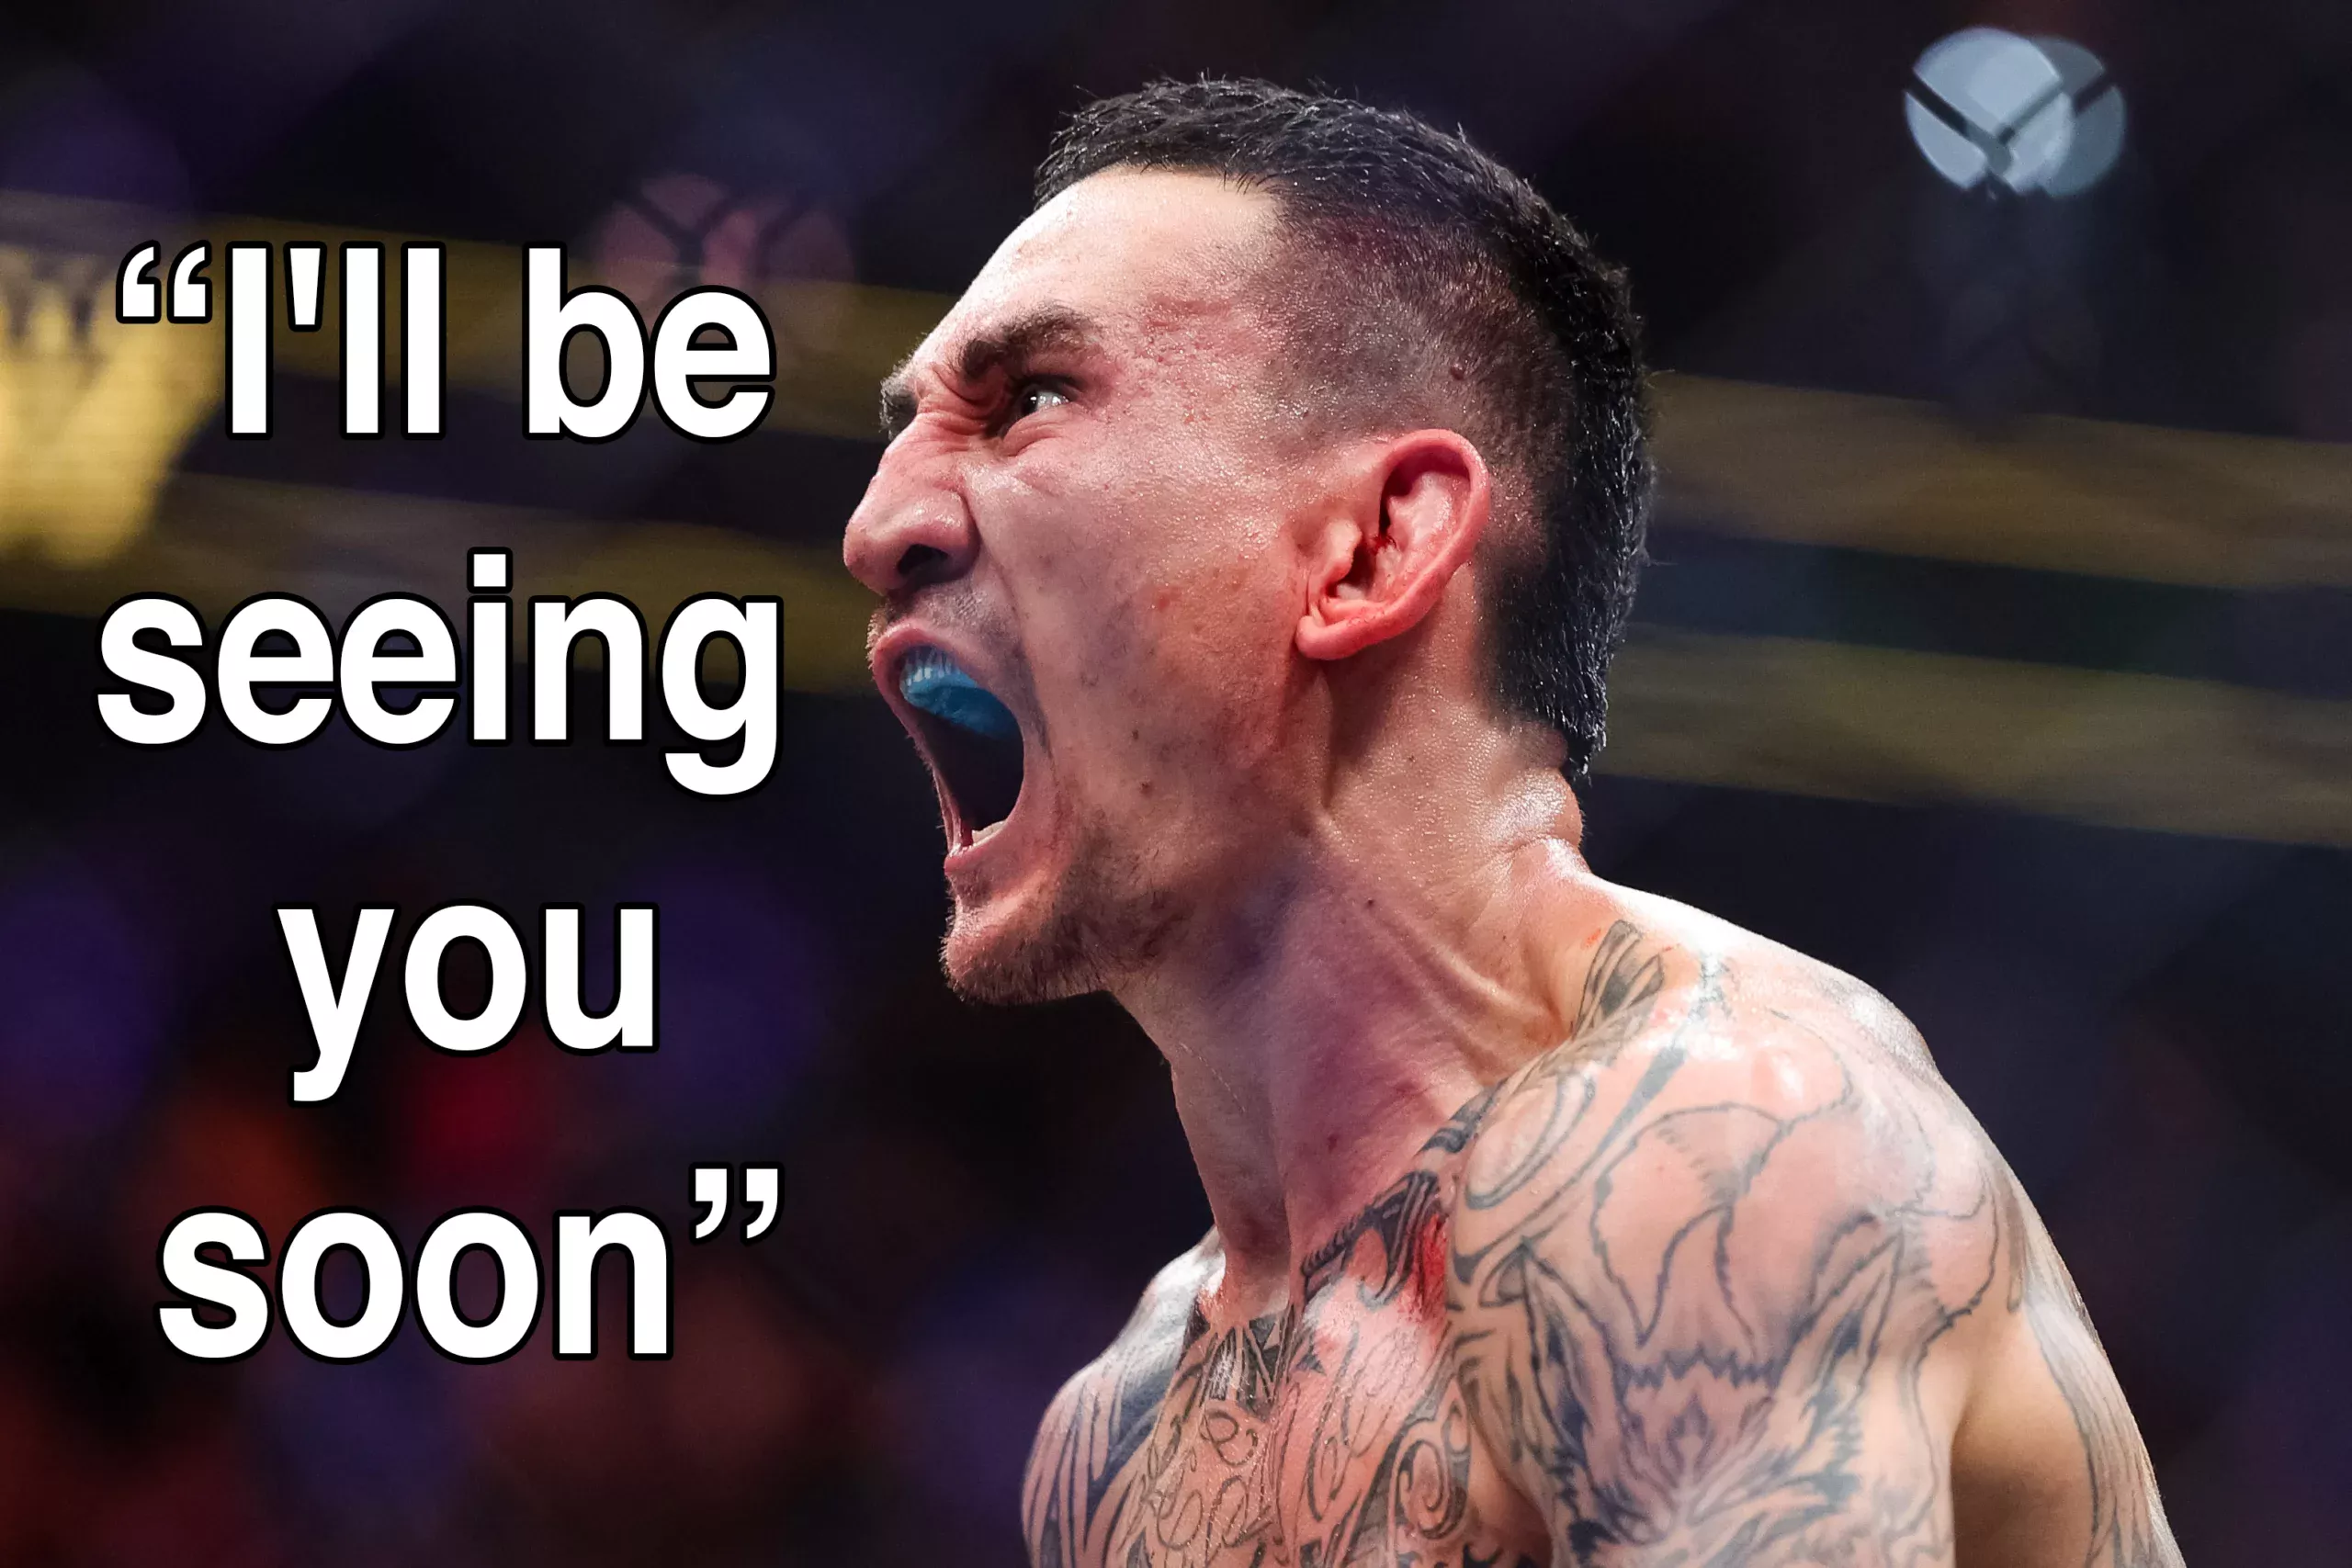 “I’ll be seeing you soon”: Max Holloway reacts to UFC champion Ilia Topuria’s chilly callout response